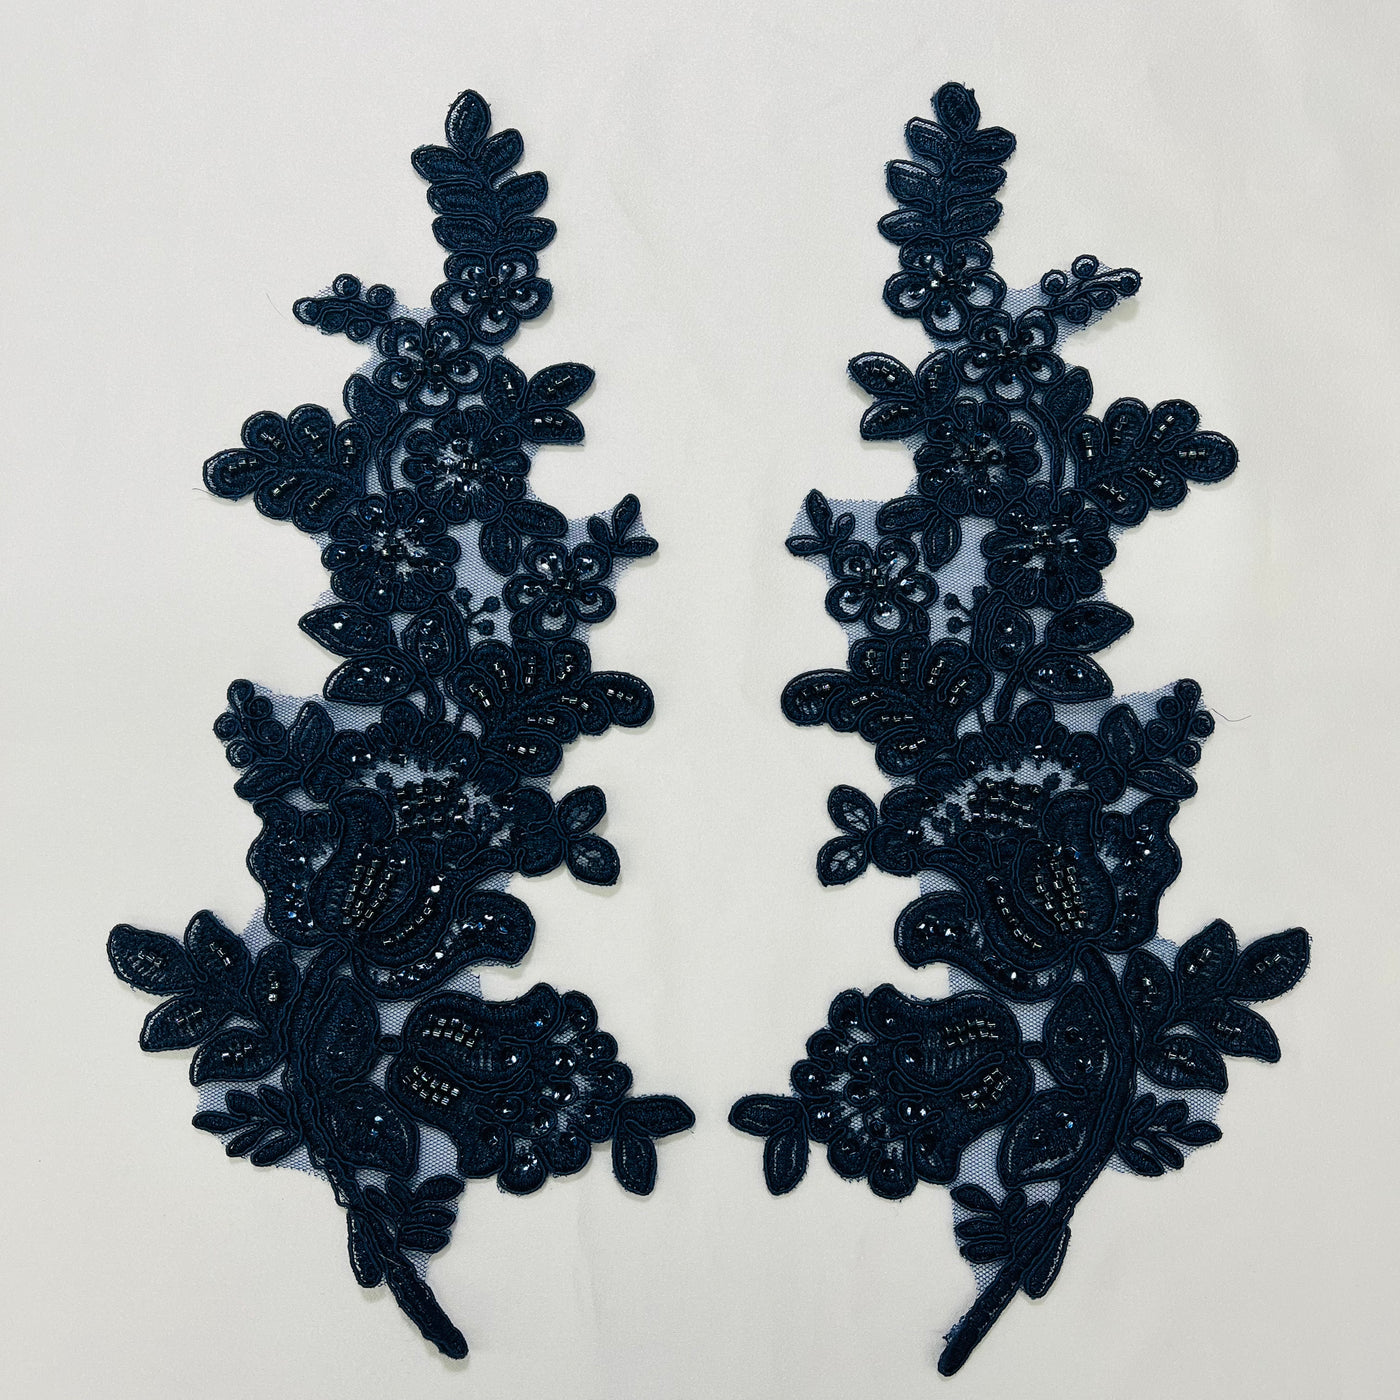 Beaded & Corded Floral Lace Applique Embroidered on 100% Polyester Net Mesh | Lace USA